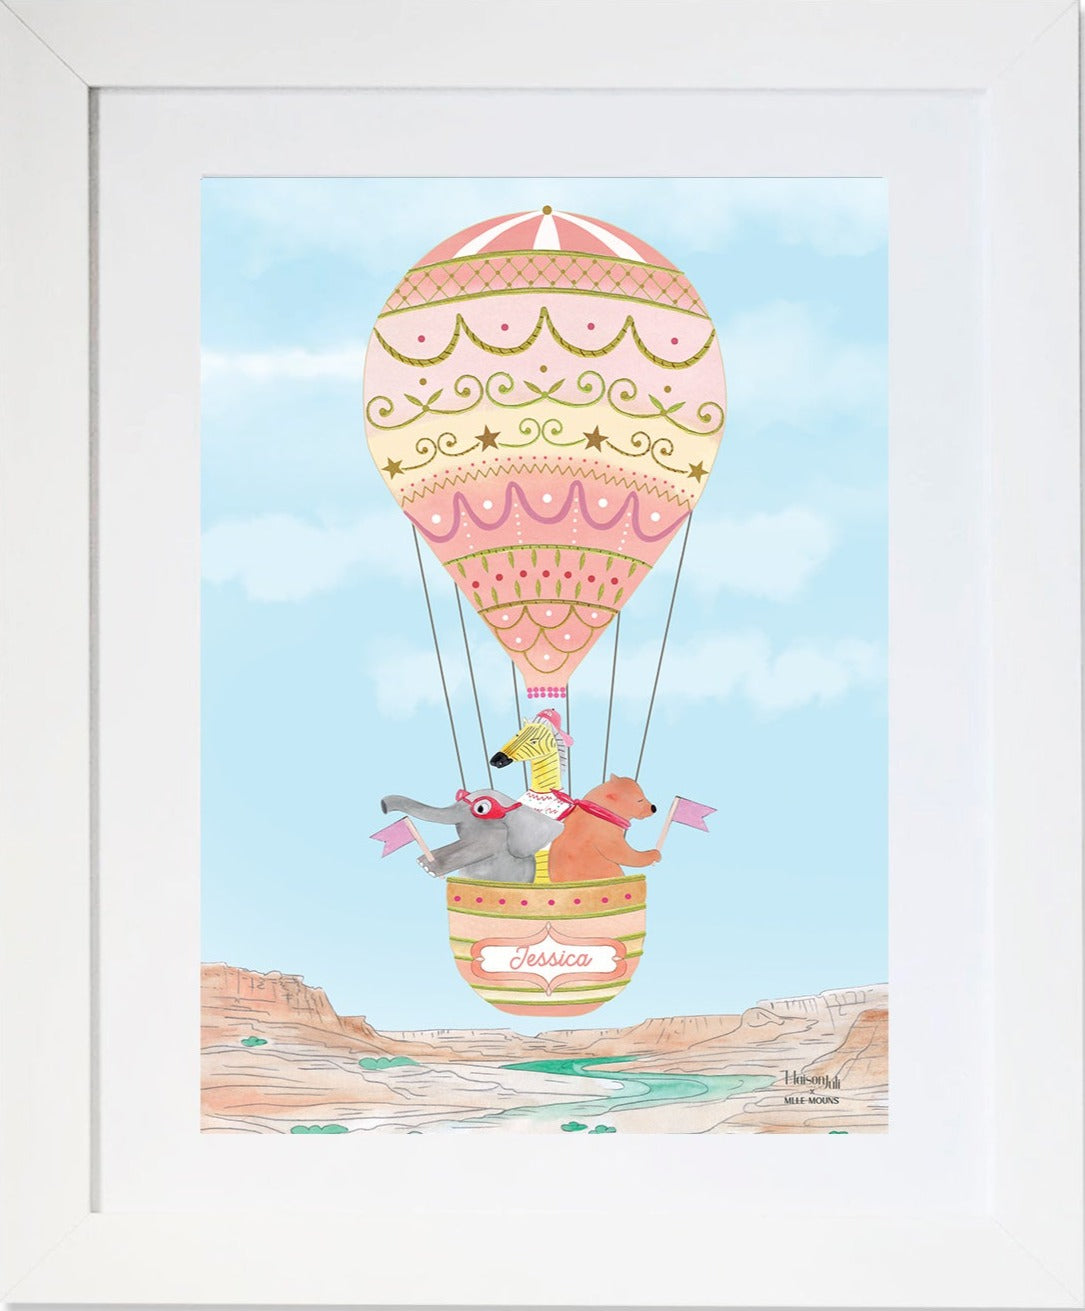 The Personalised Hot Air Balloon of the Grand Canyon Artwork for girls